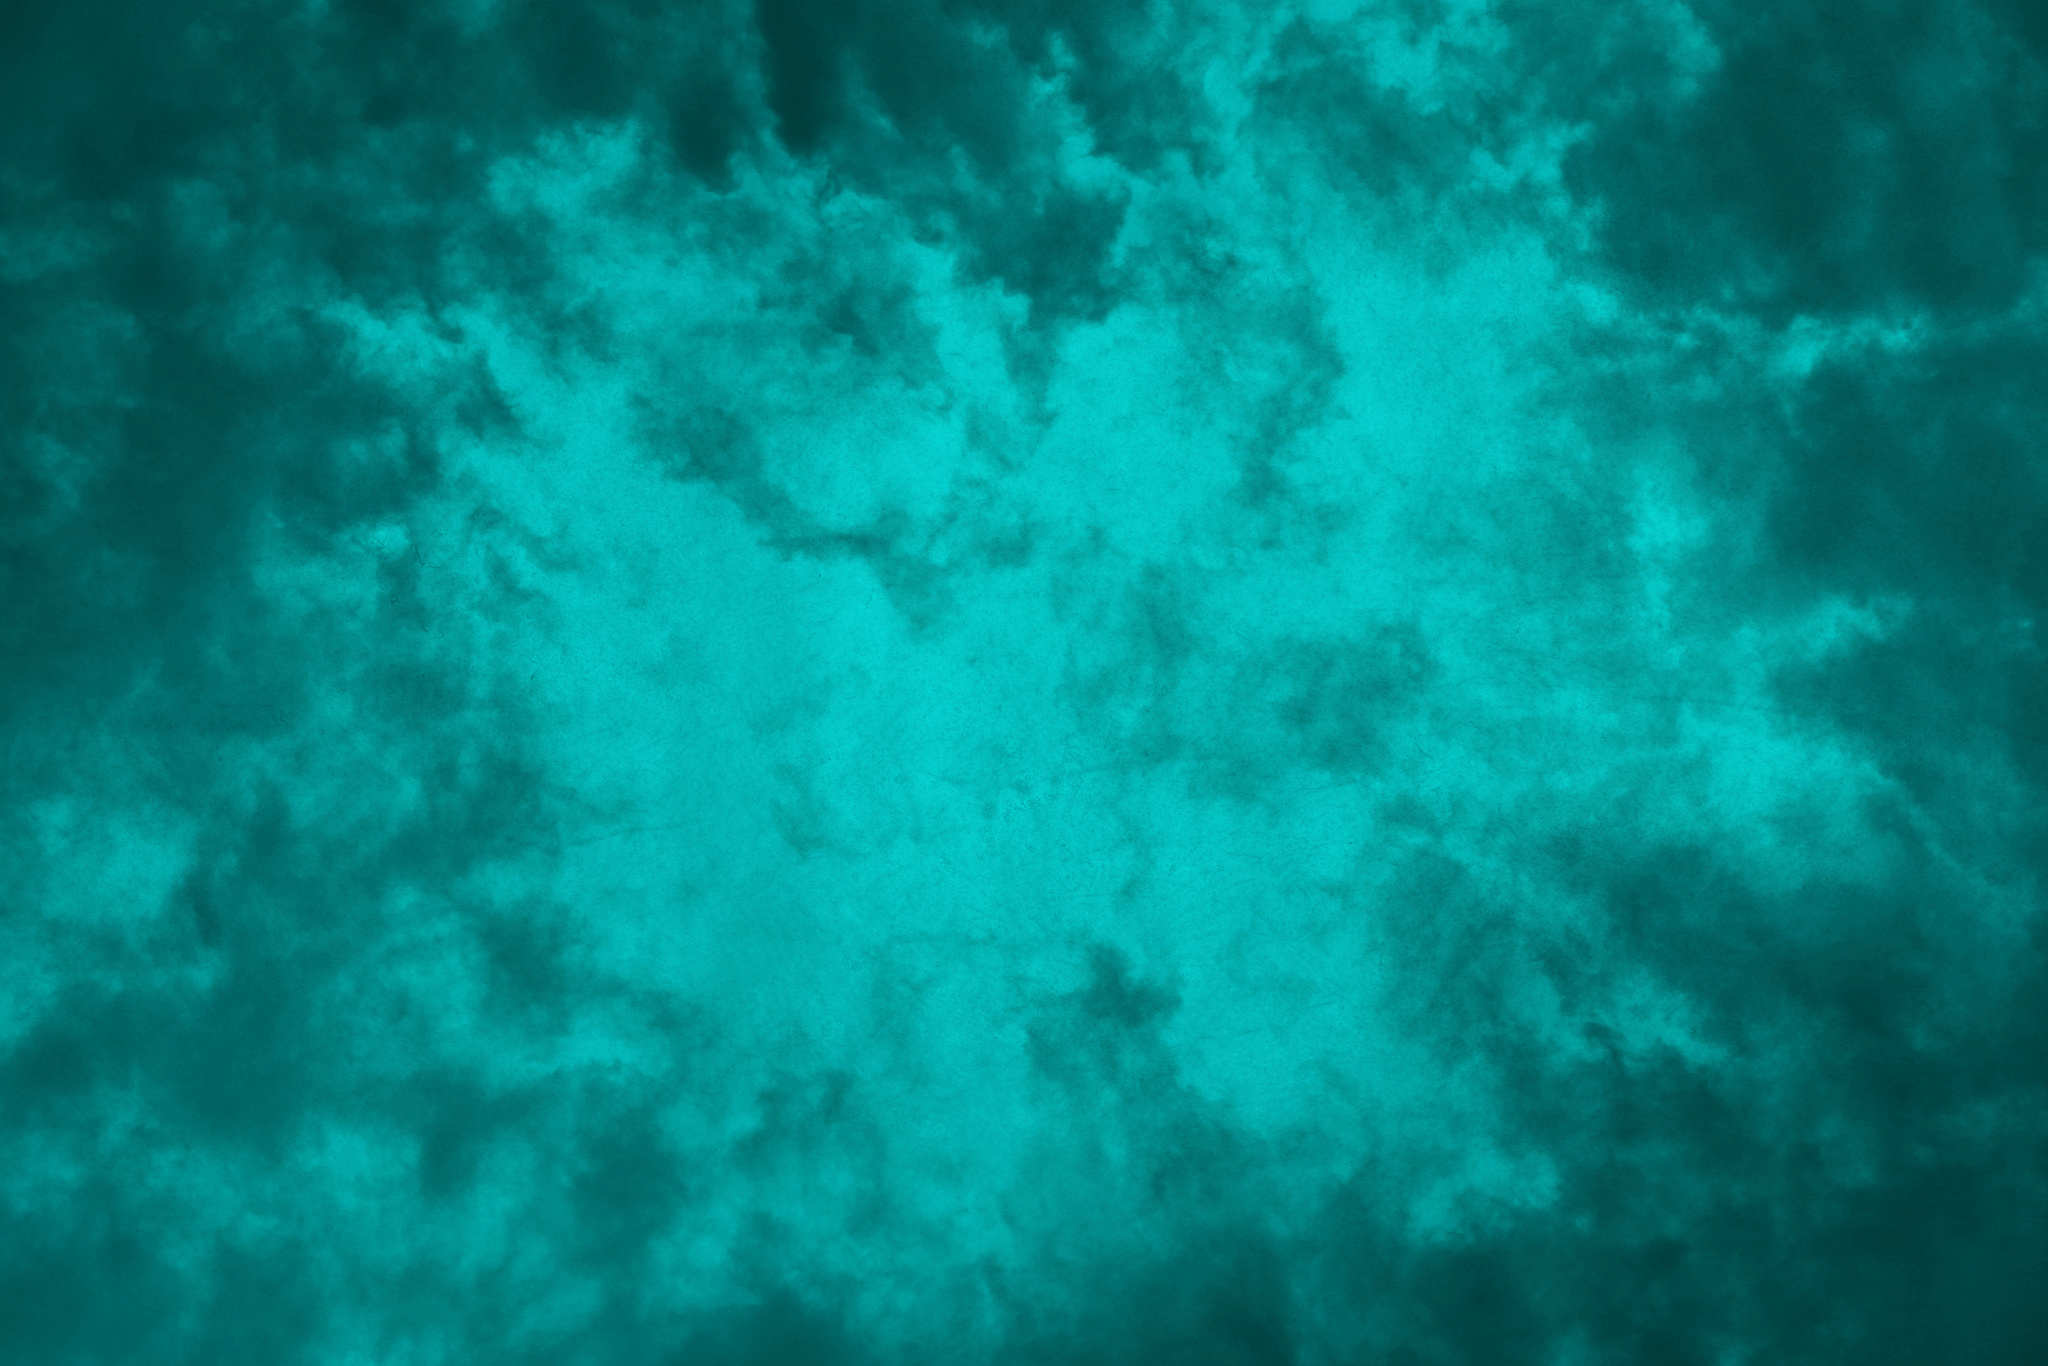 Teal blue abstract grunge background